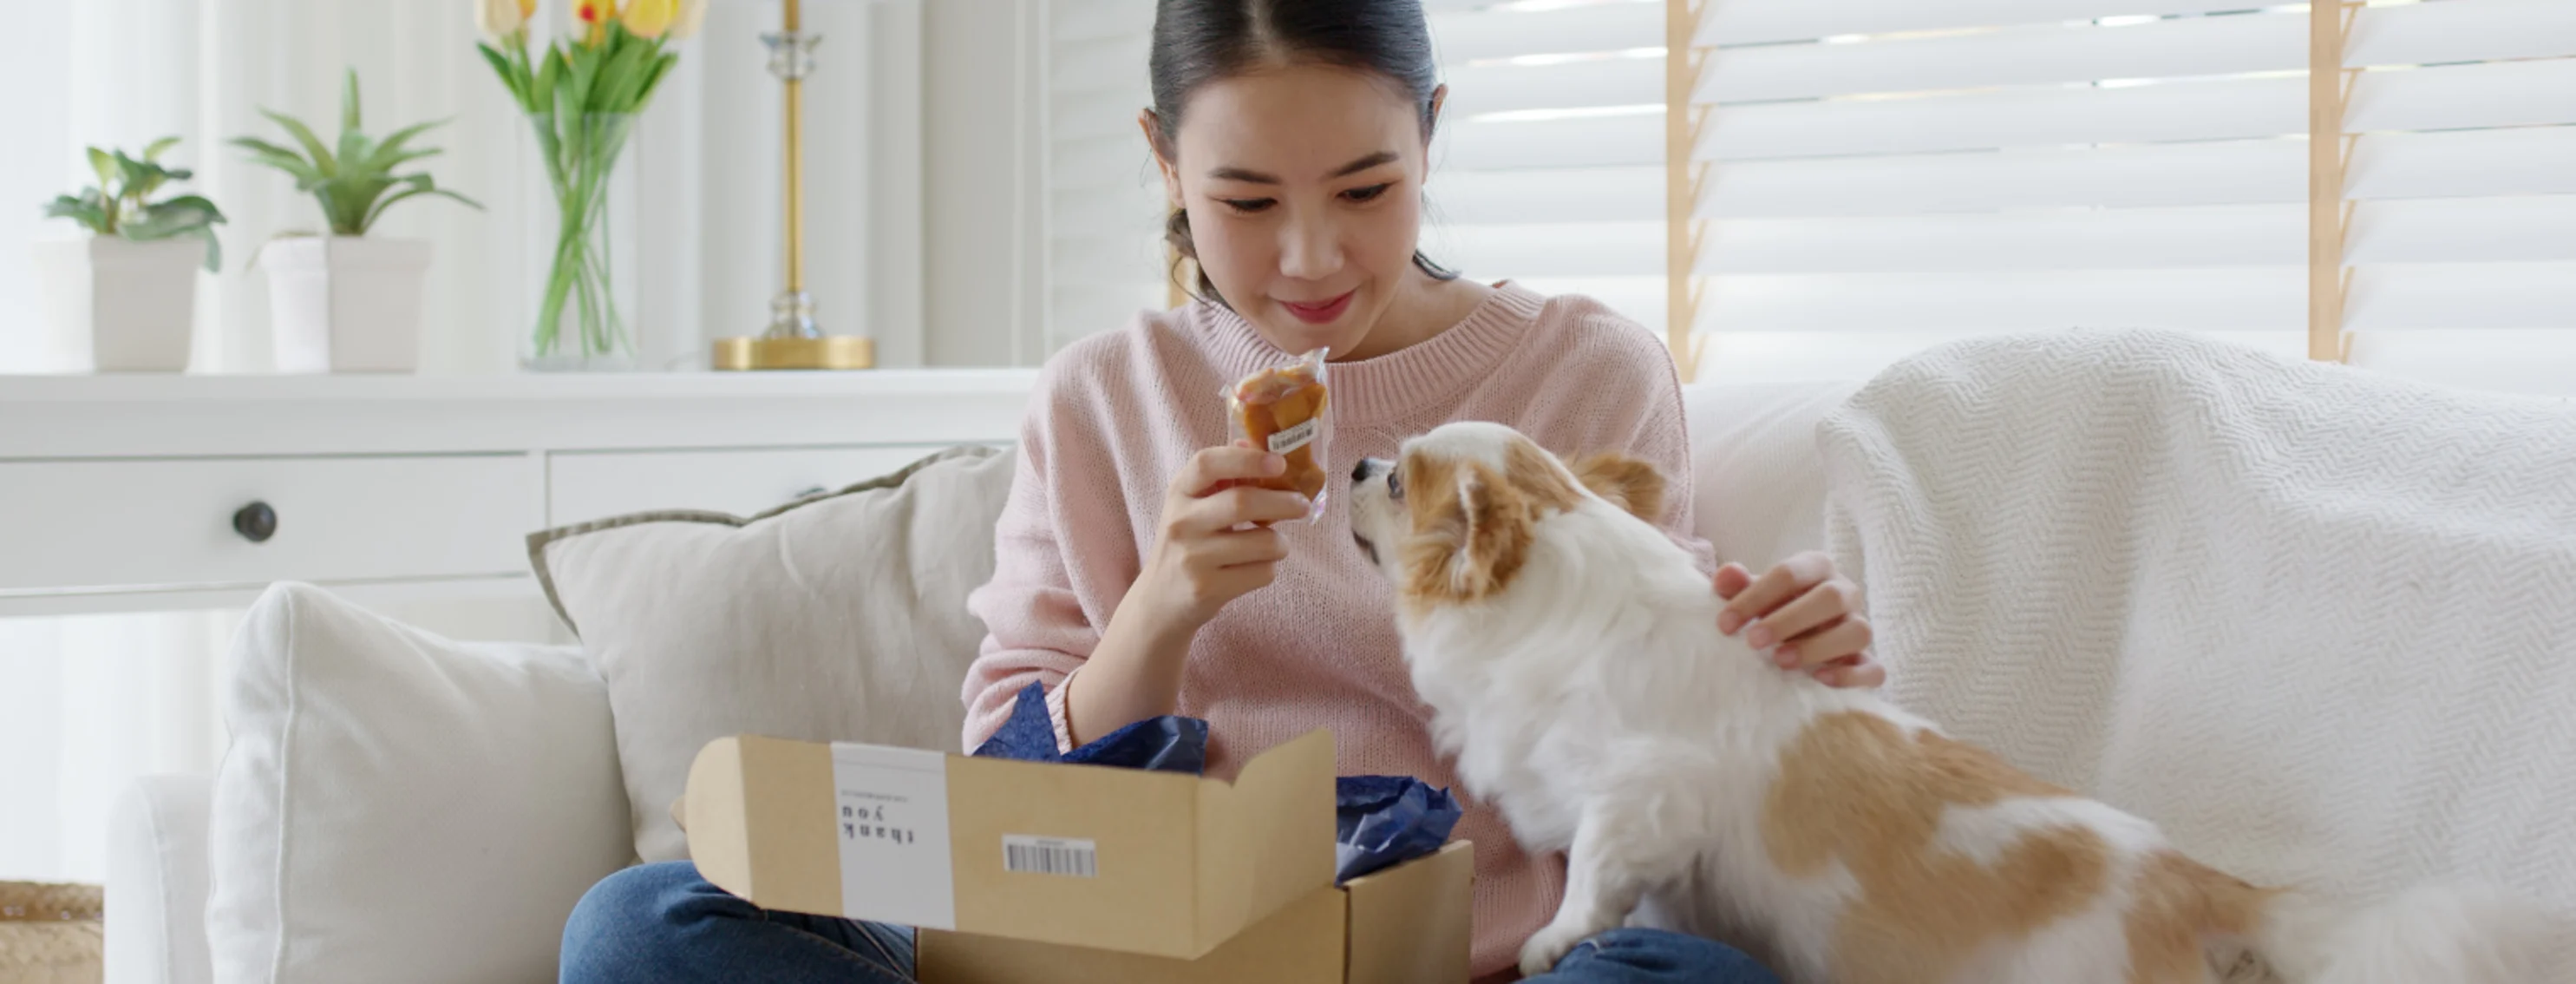 Girl Giving Dog a Treat From Package